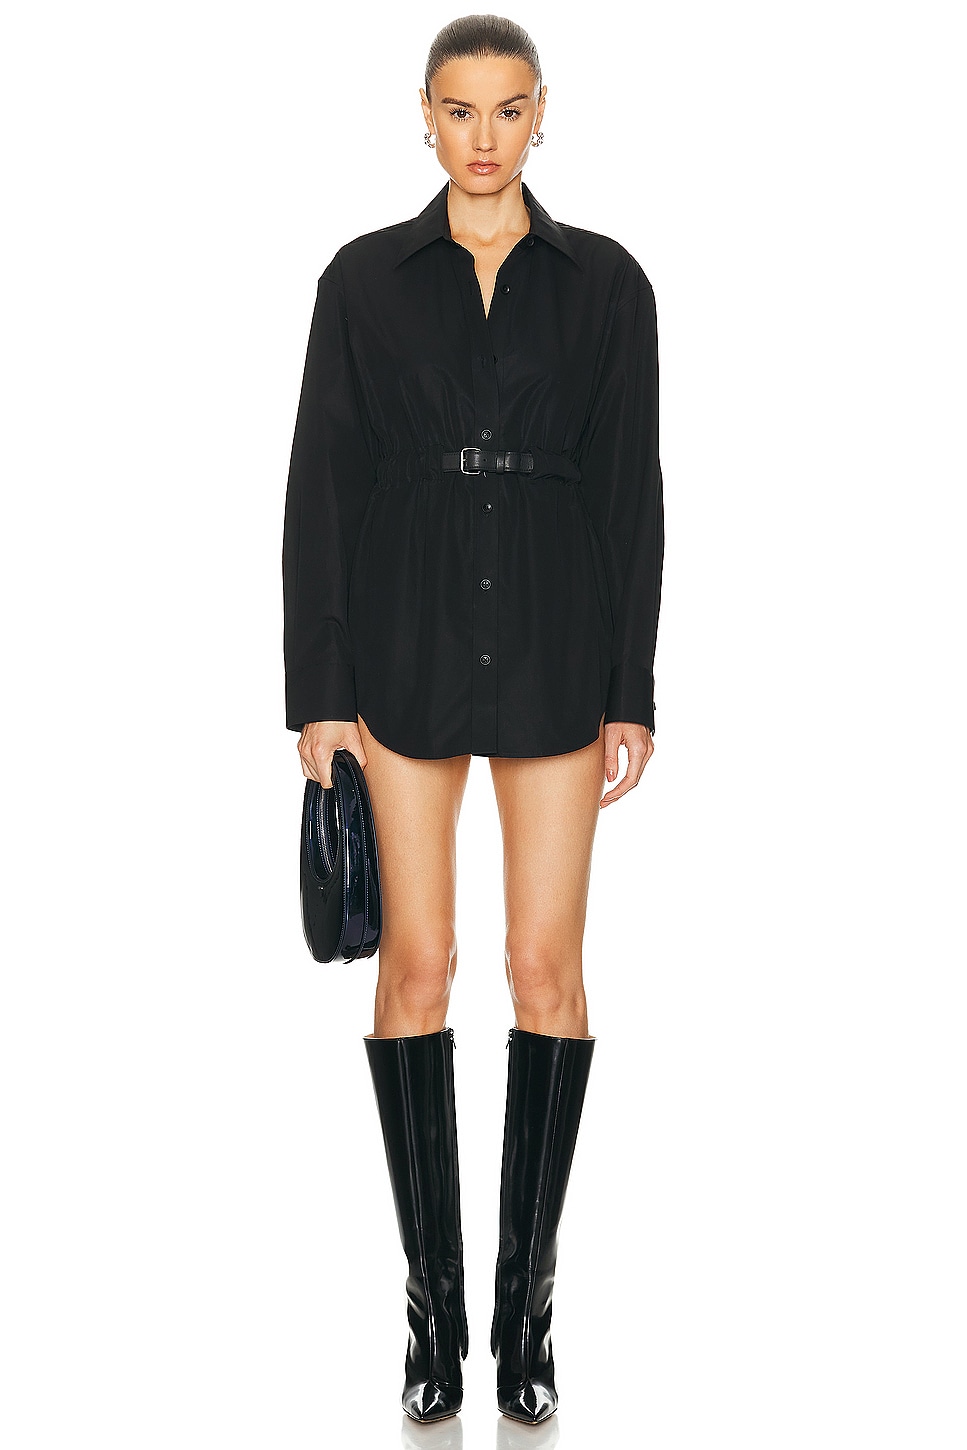 Image 1 of Alexander Wang Button Down Tunic Dress With Leather Belt in Black